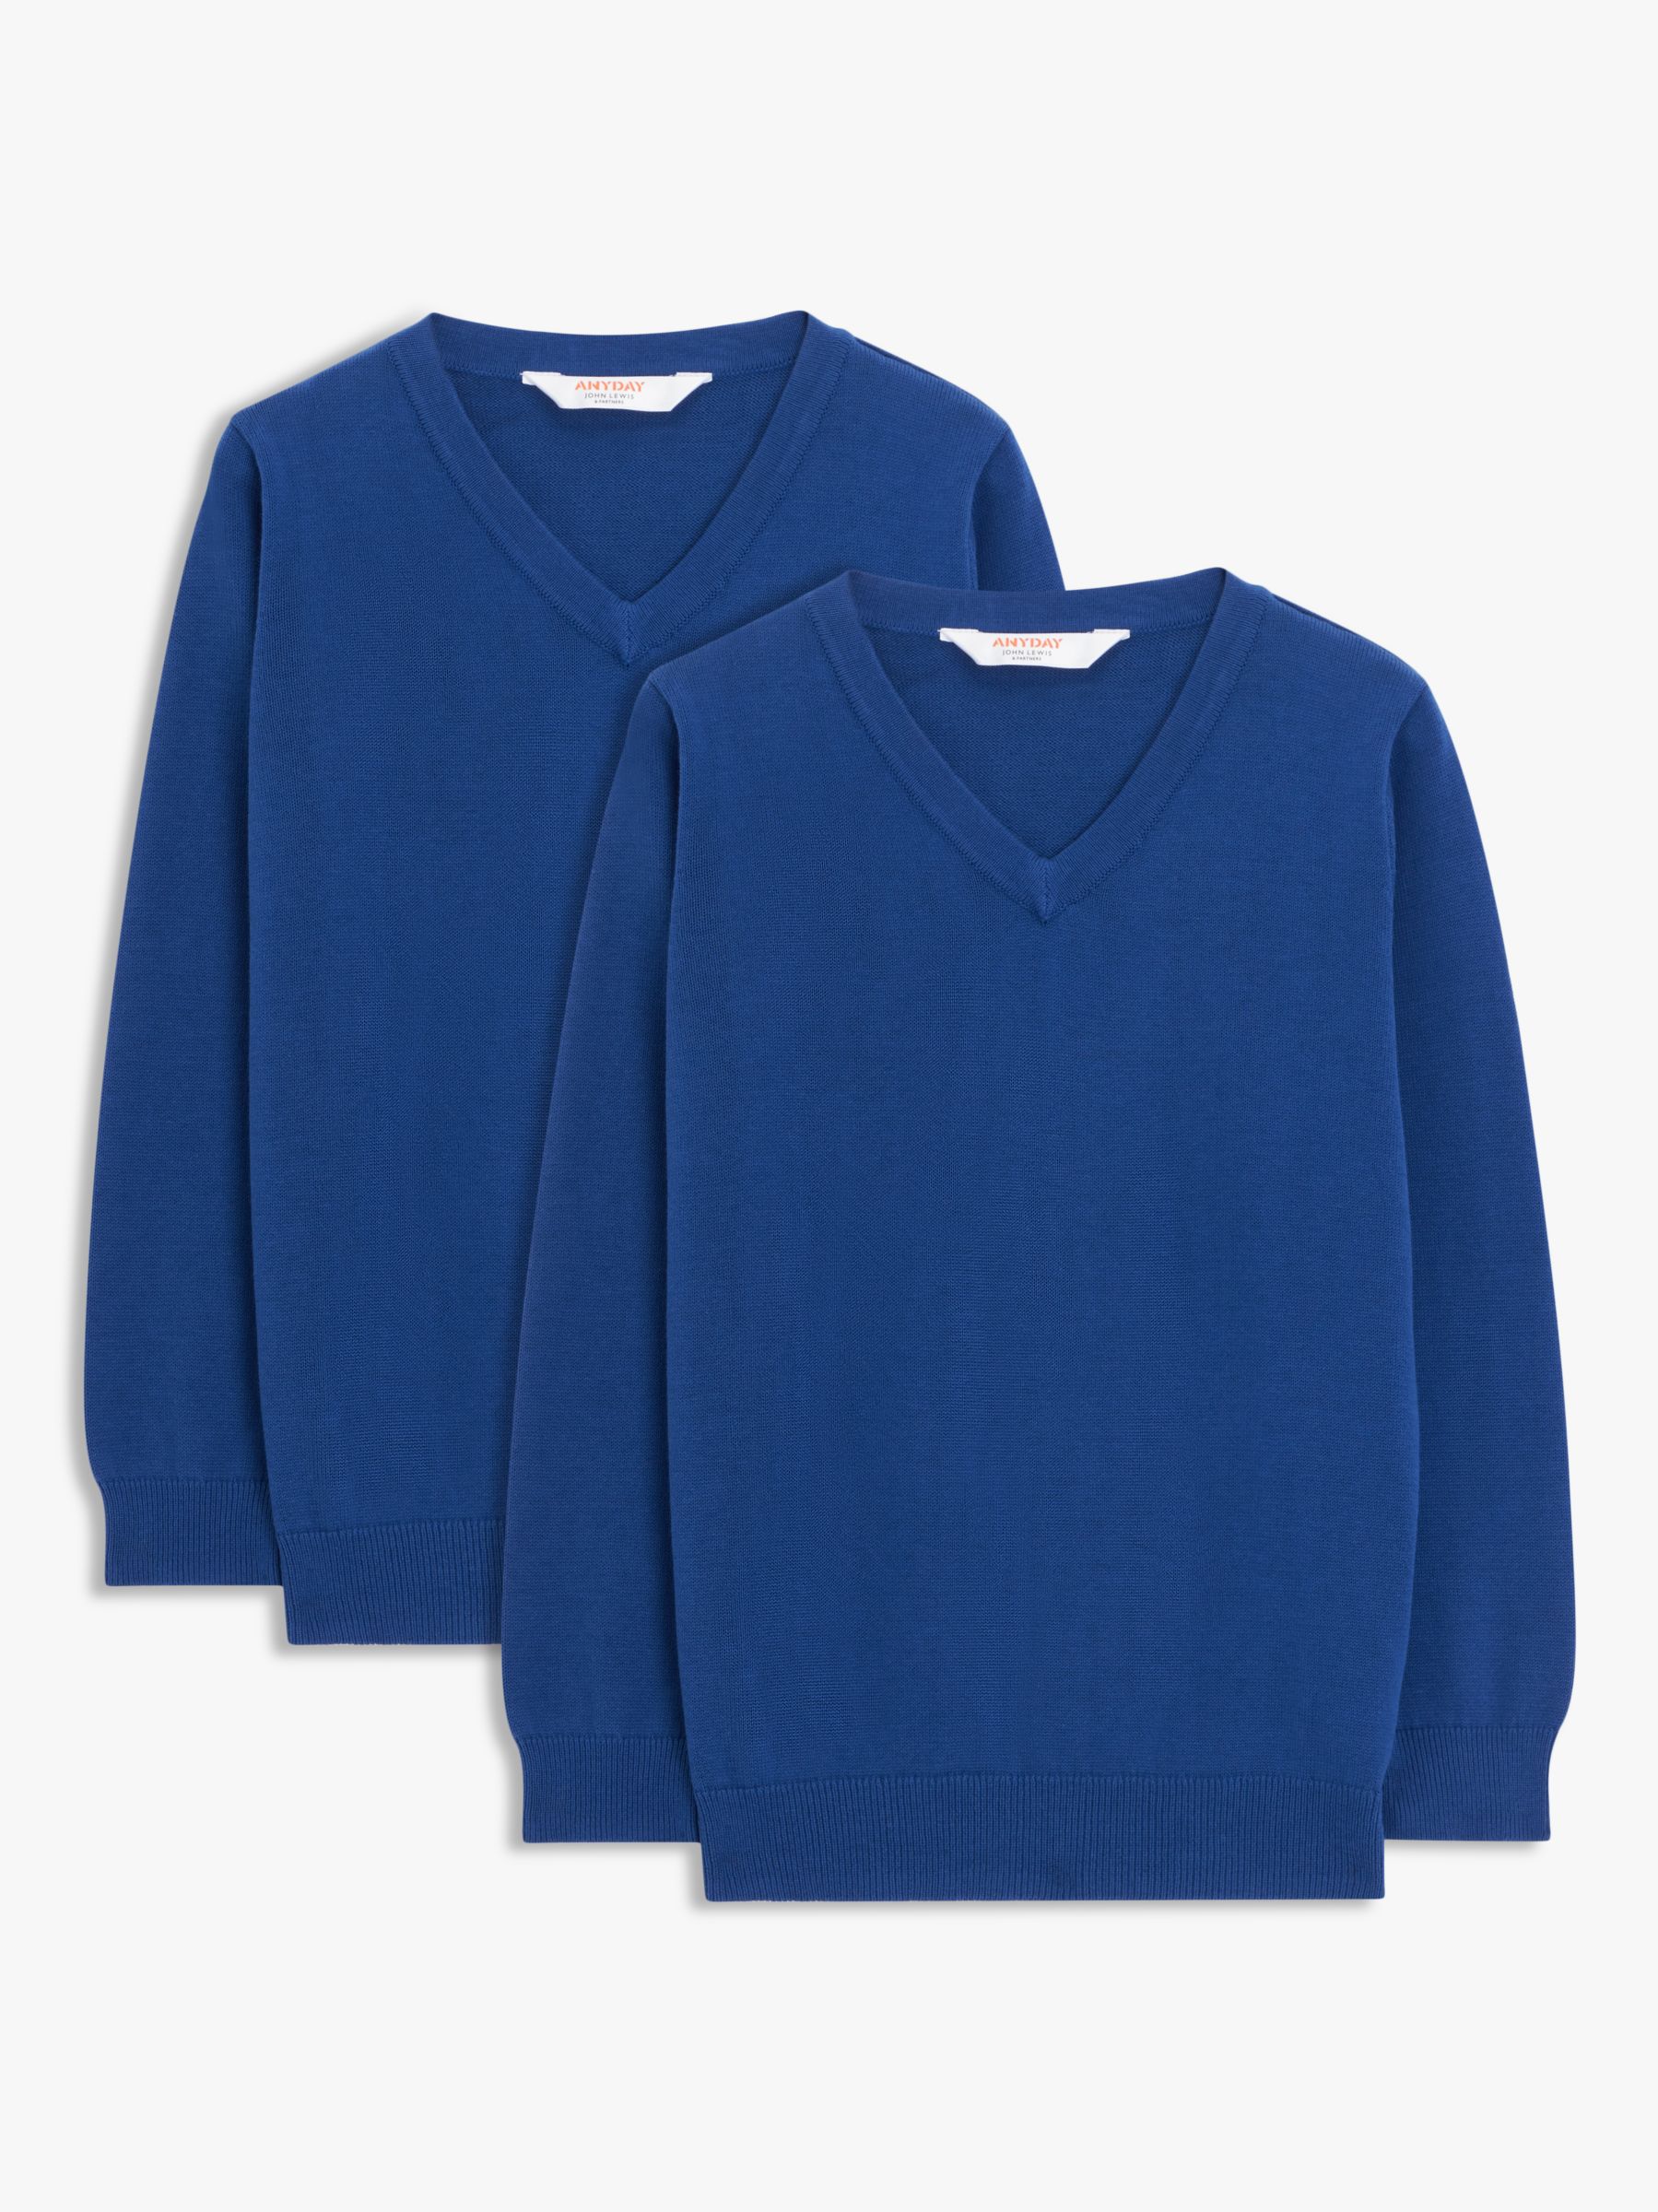 John Lewis ANYDAY Unisex Cotton School Jumper, Pack of 2, Blue Royal, 15-16 years